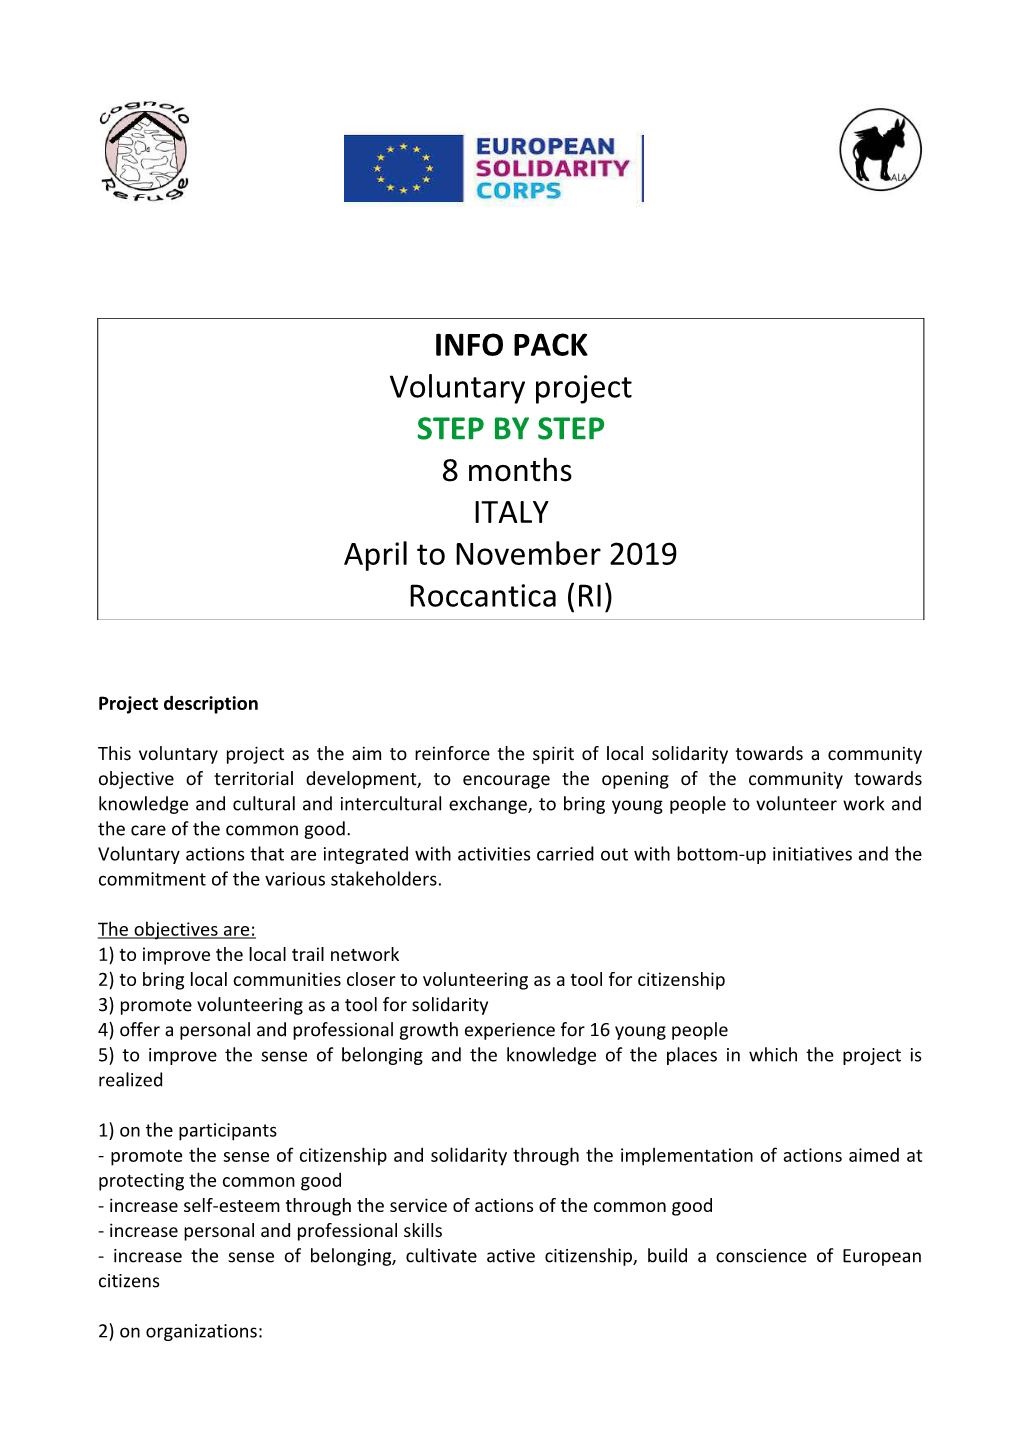 INFO PACK Voluntary Project STEP by STEP 8 Months ITALY April to November 2019 Roccantica (RI)